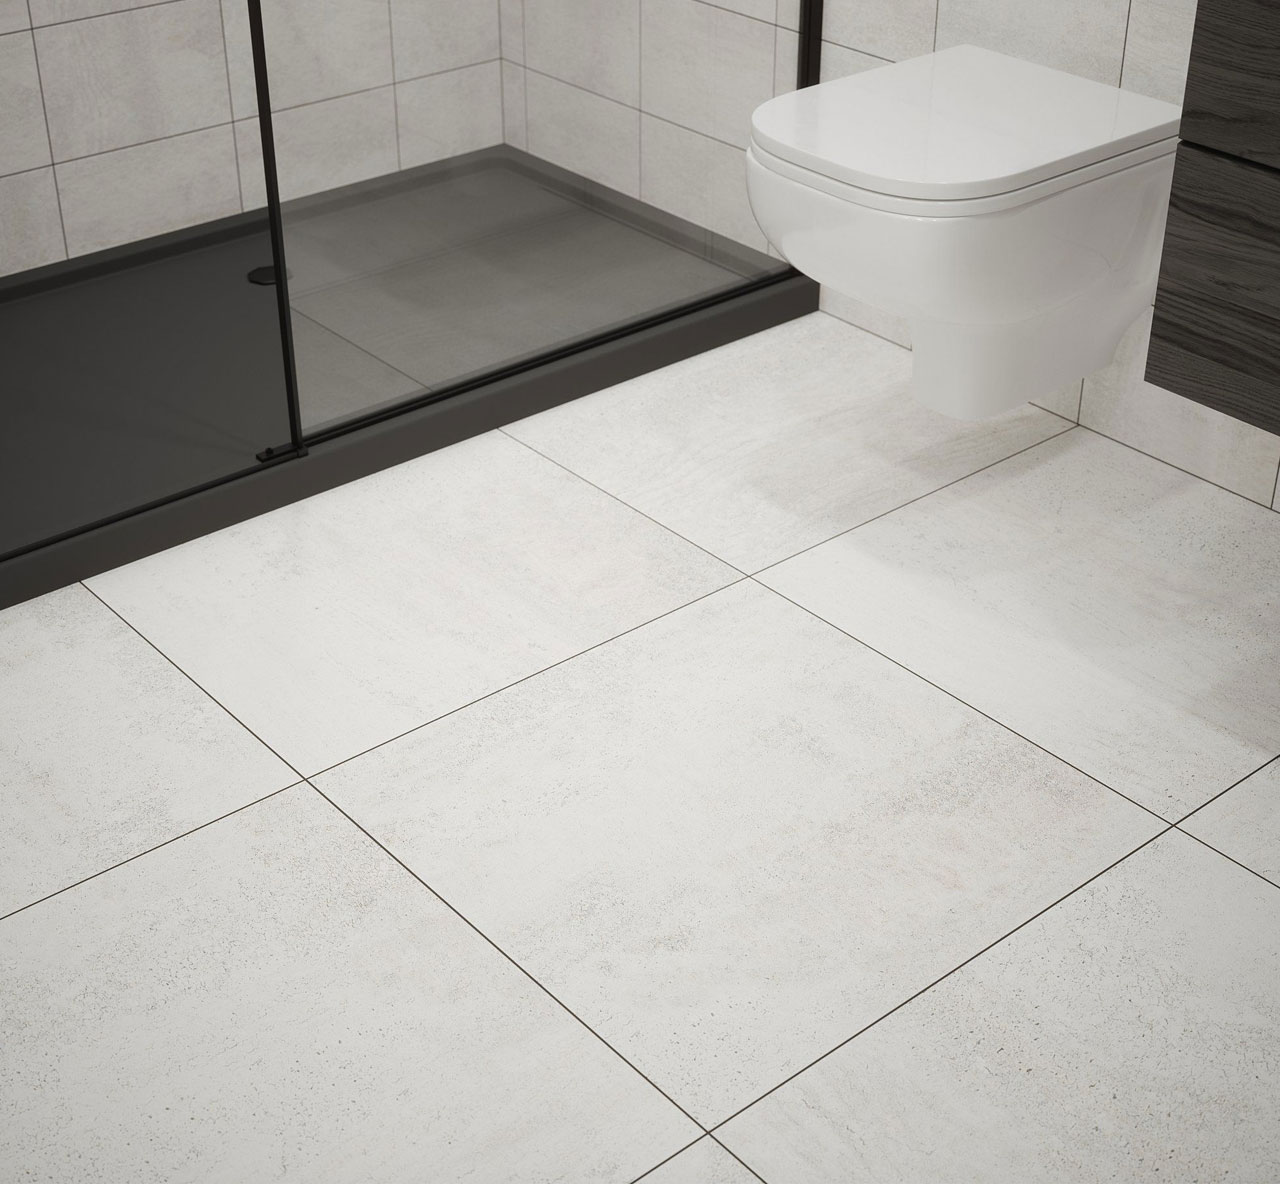 Johnsons Ashlar Weathered White Stone Effect Floor Tiles used on a bathroom floor with a separate shower area